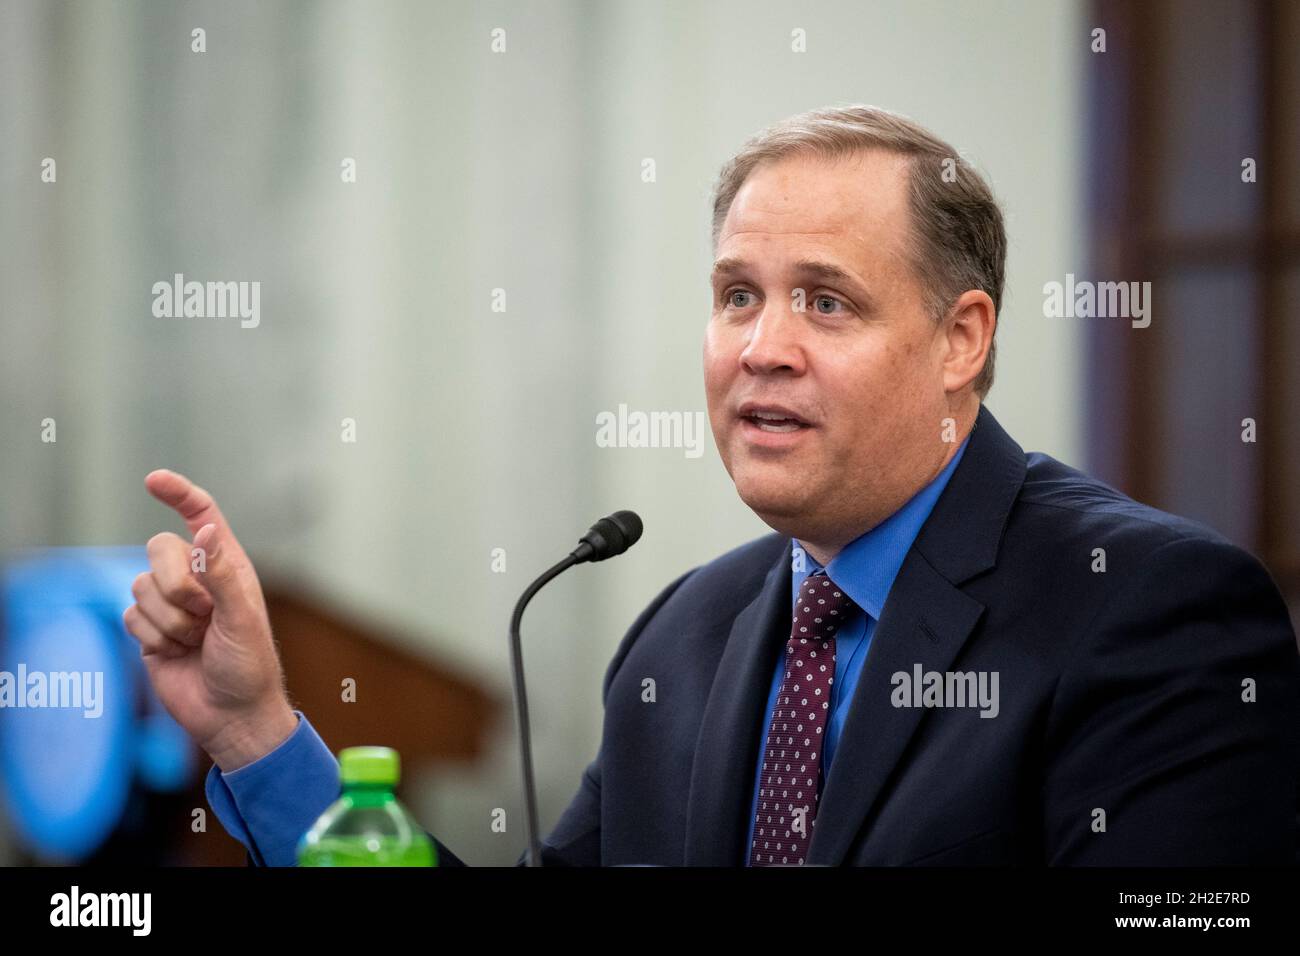 Washington, United States Of America. 21st Oct, 2021. Jim Bridenstine, Former NASA Administrator, appears during a Senate Committee on Commerce, Science, & Transportation Subcommittee on Space and Science hearing “International Collaboration and Competition in Space: Oversight of NASA's Role and Programs” in the Russell Senate Office Building in Washington, DC, Thursday, October 21, 2021. Credit: Rod Lamkey/CNP/Sipa USA Credit: Sipa USA/Alamy Live News Stock Photo